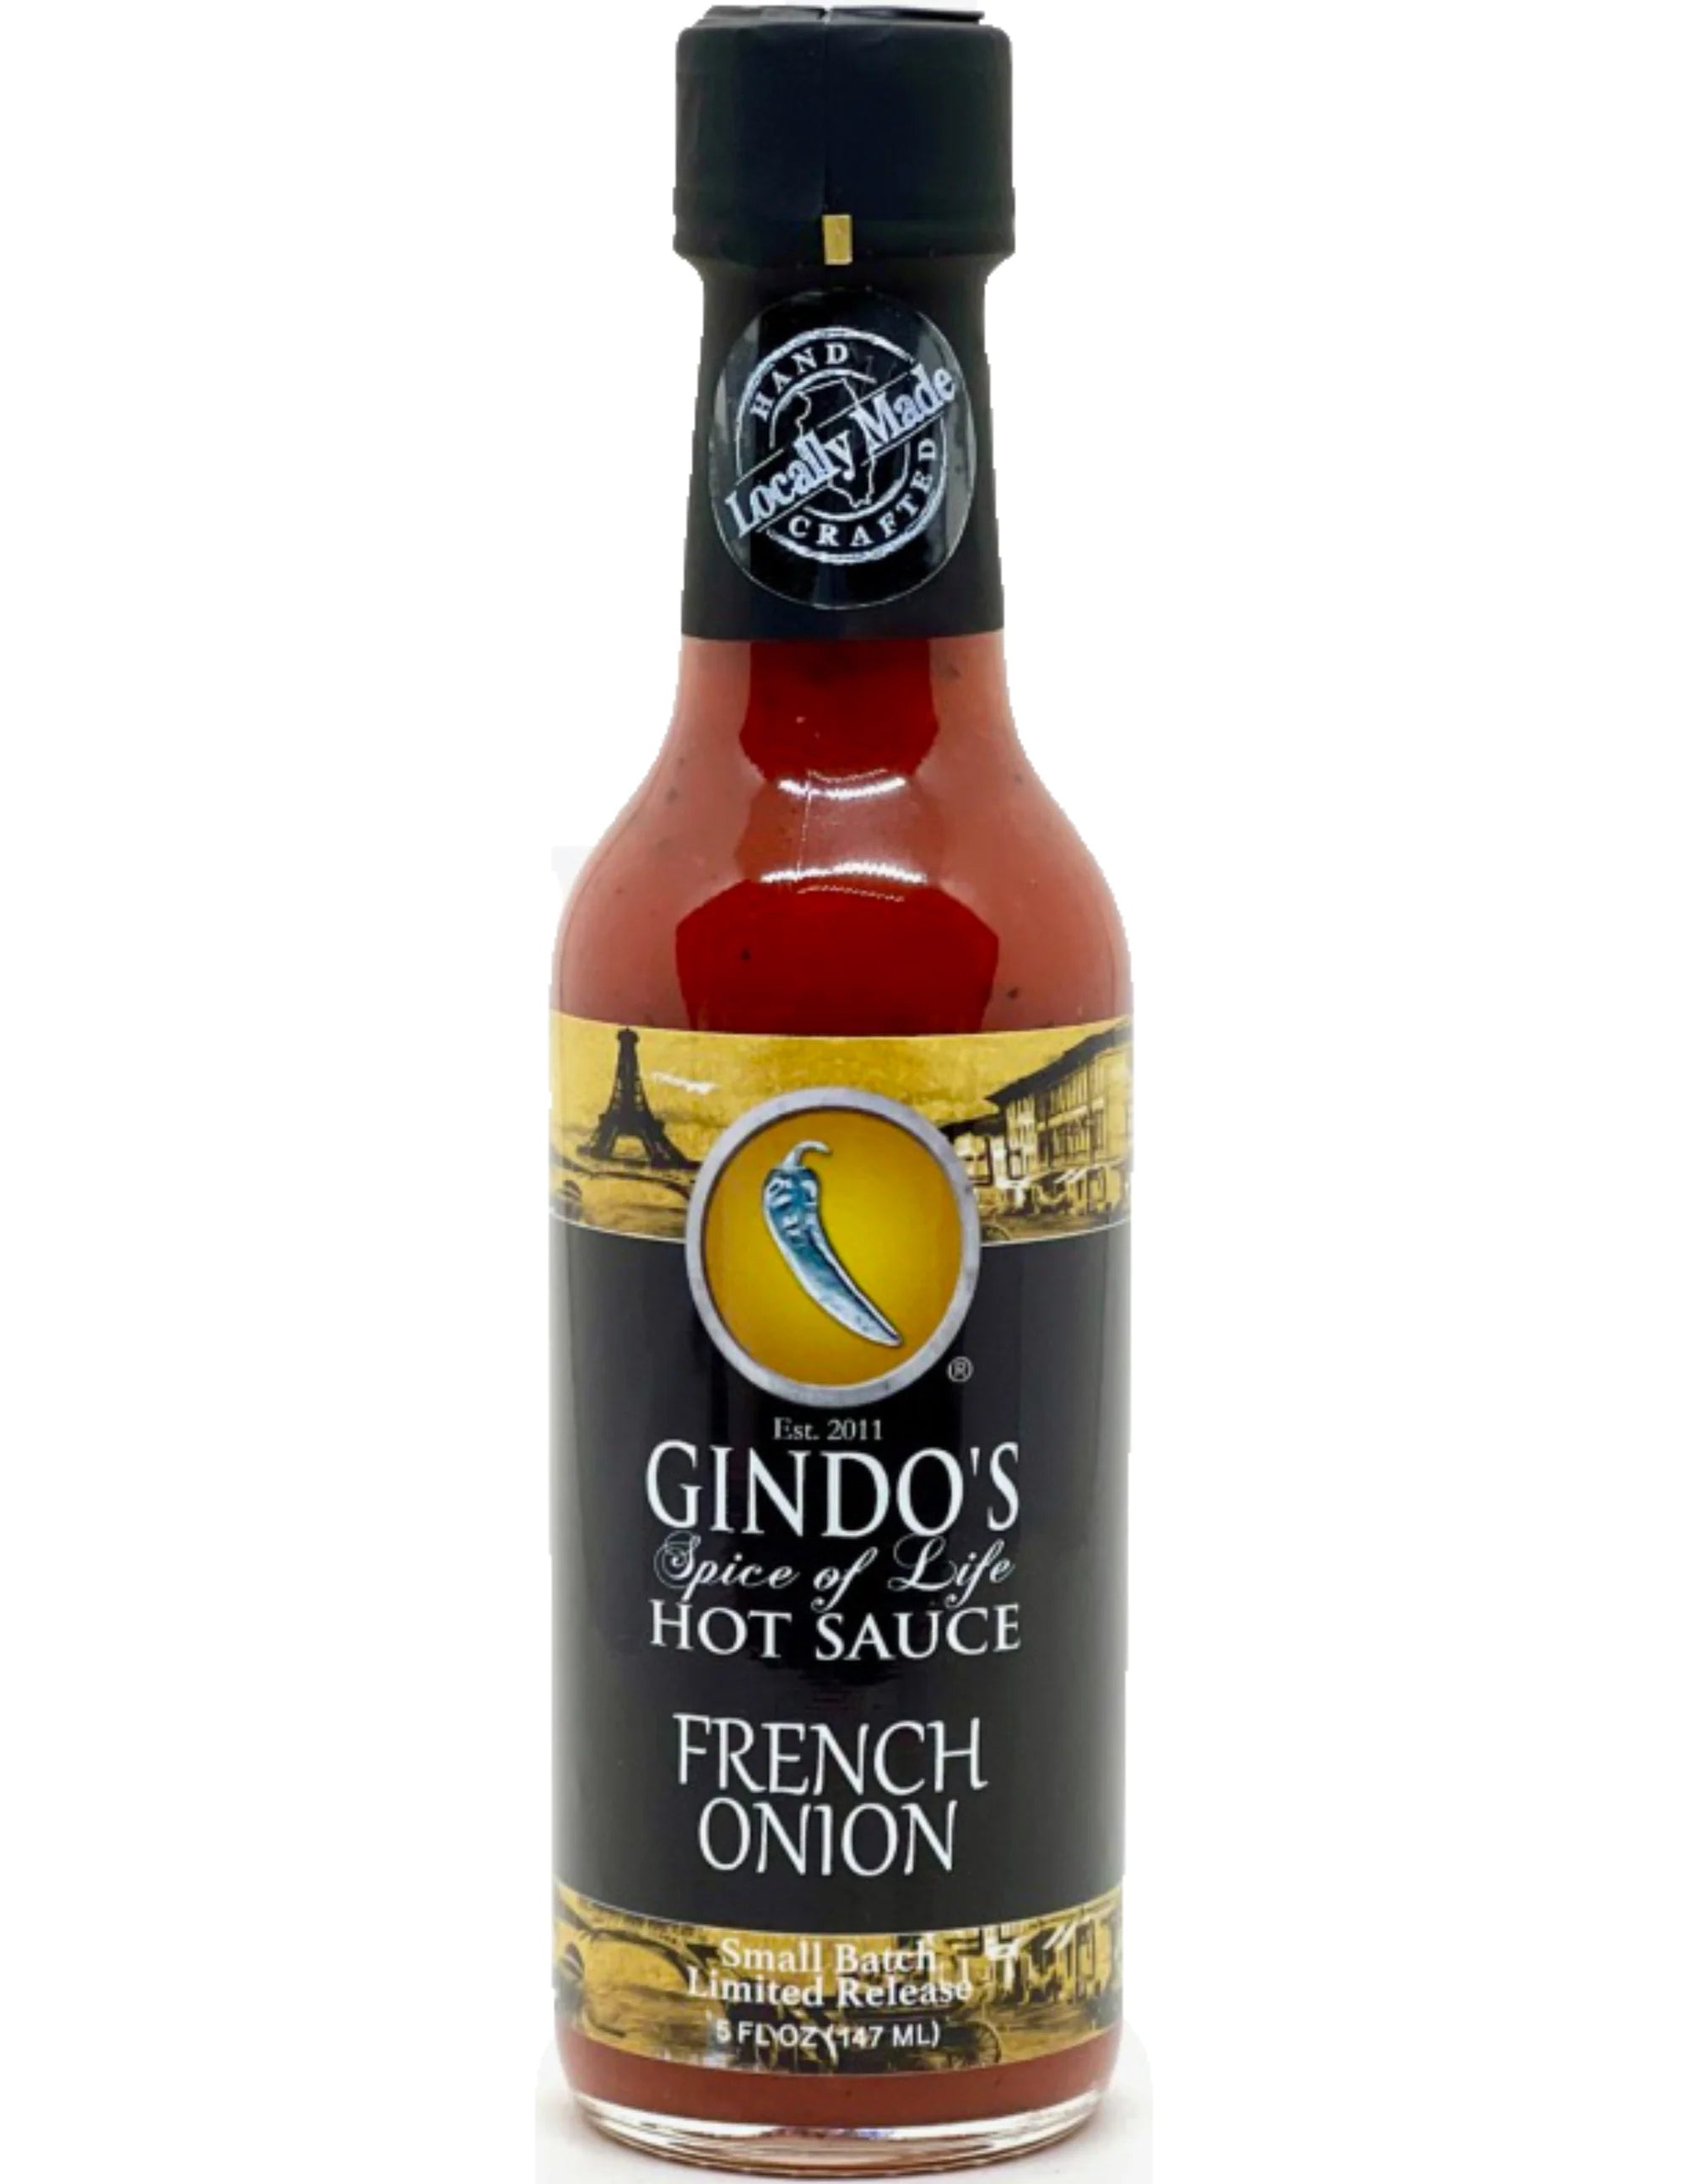 Gindo's French Onion Hot Sauce